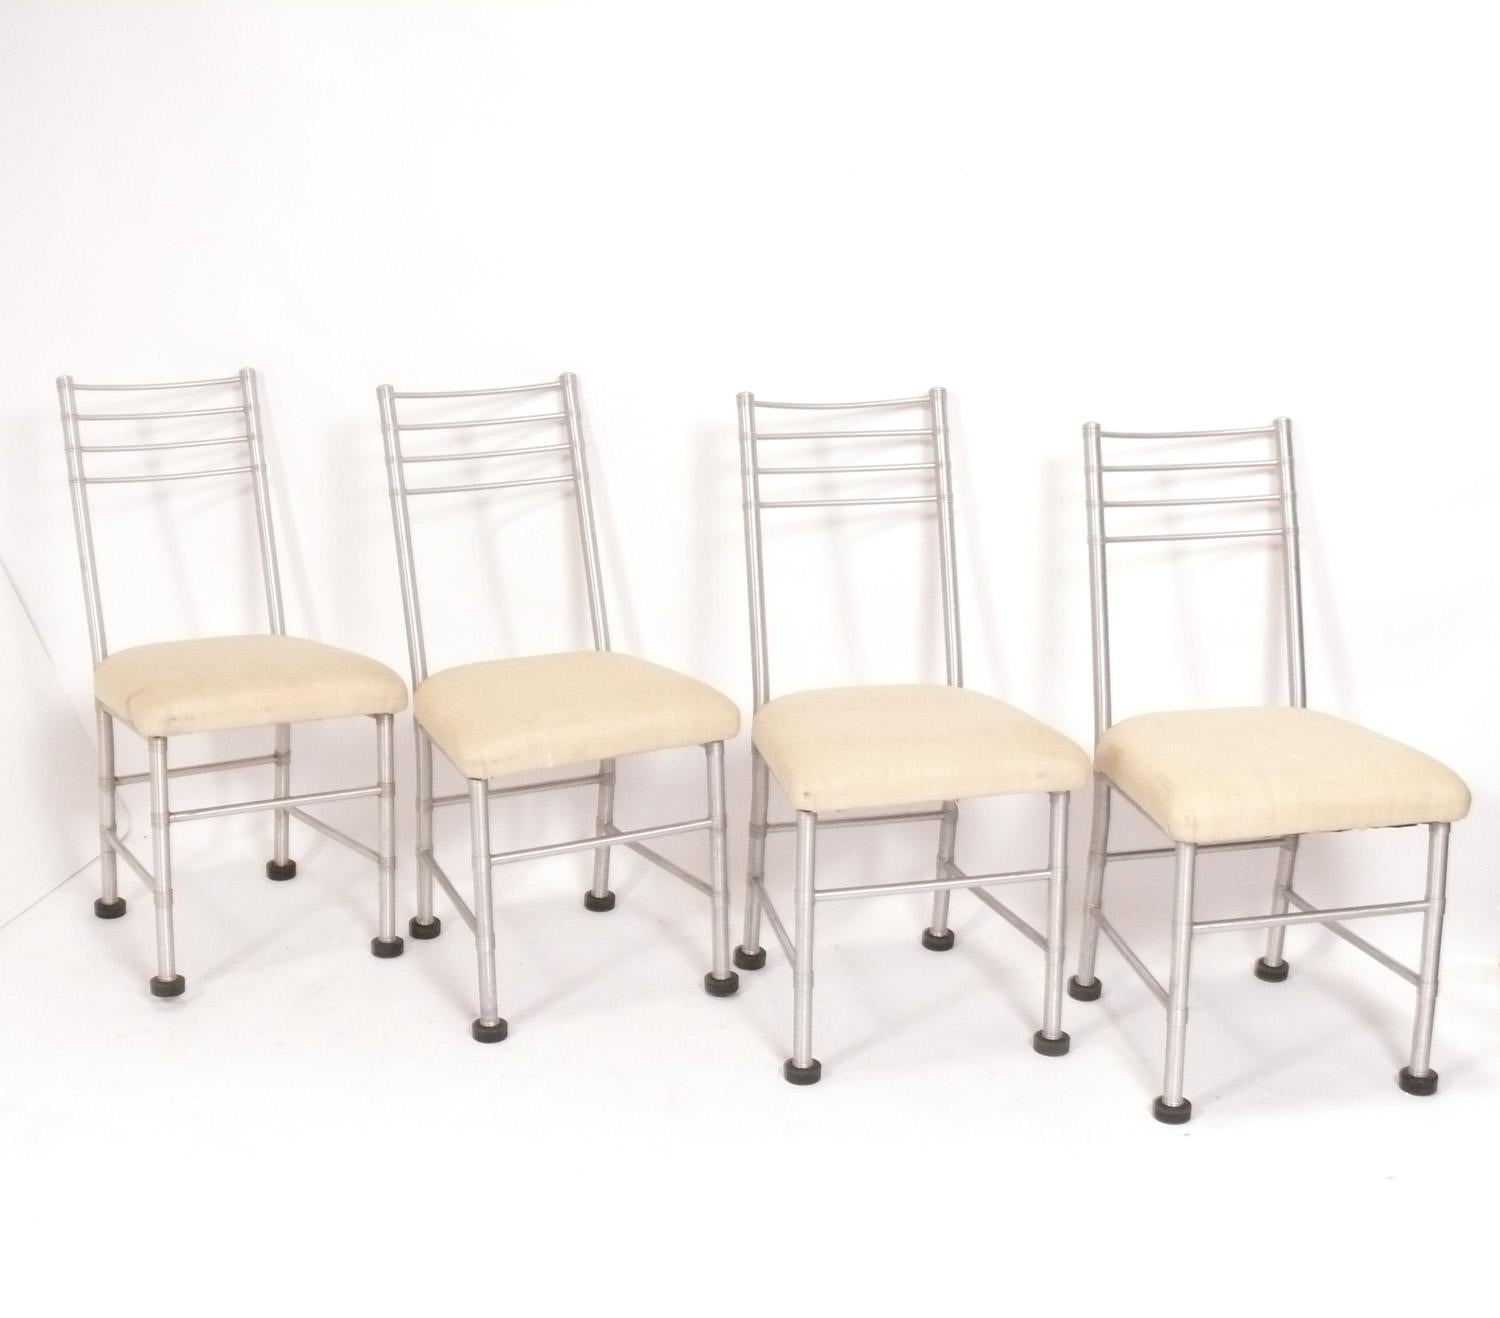 Four Art Deco Aluminum Dining Chairs, designed by Warren McArthur, American, circa 1930s. Signed with Warren McArthur label. These chairs are currently being reupholstered and can be completed in your fabric. Simply send us three yards of your